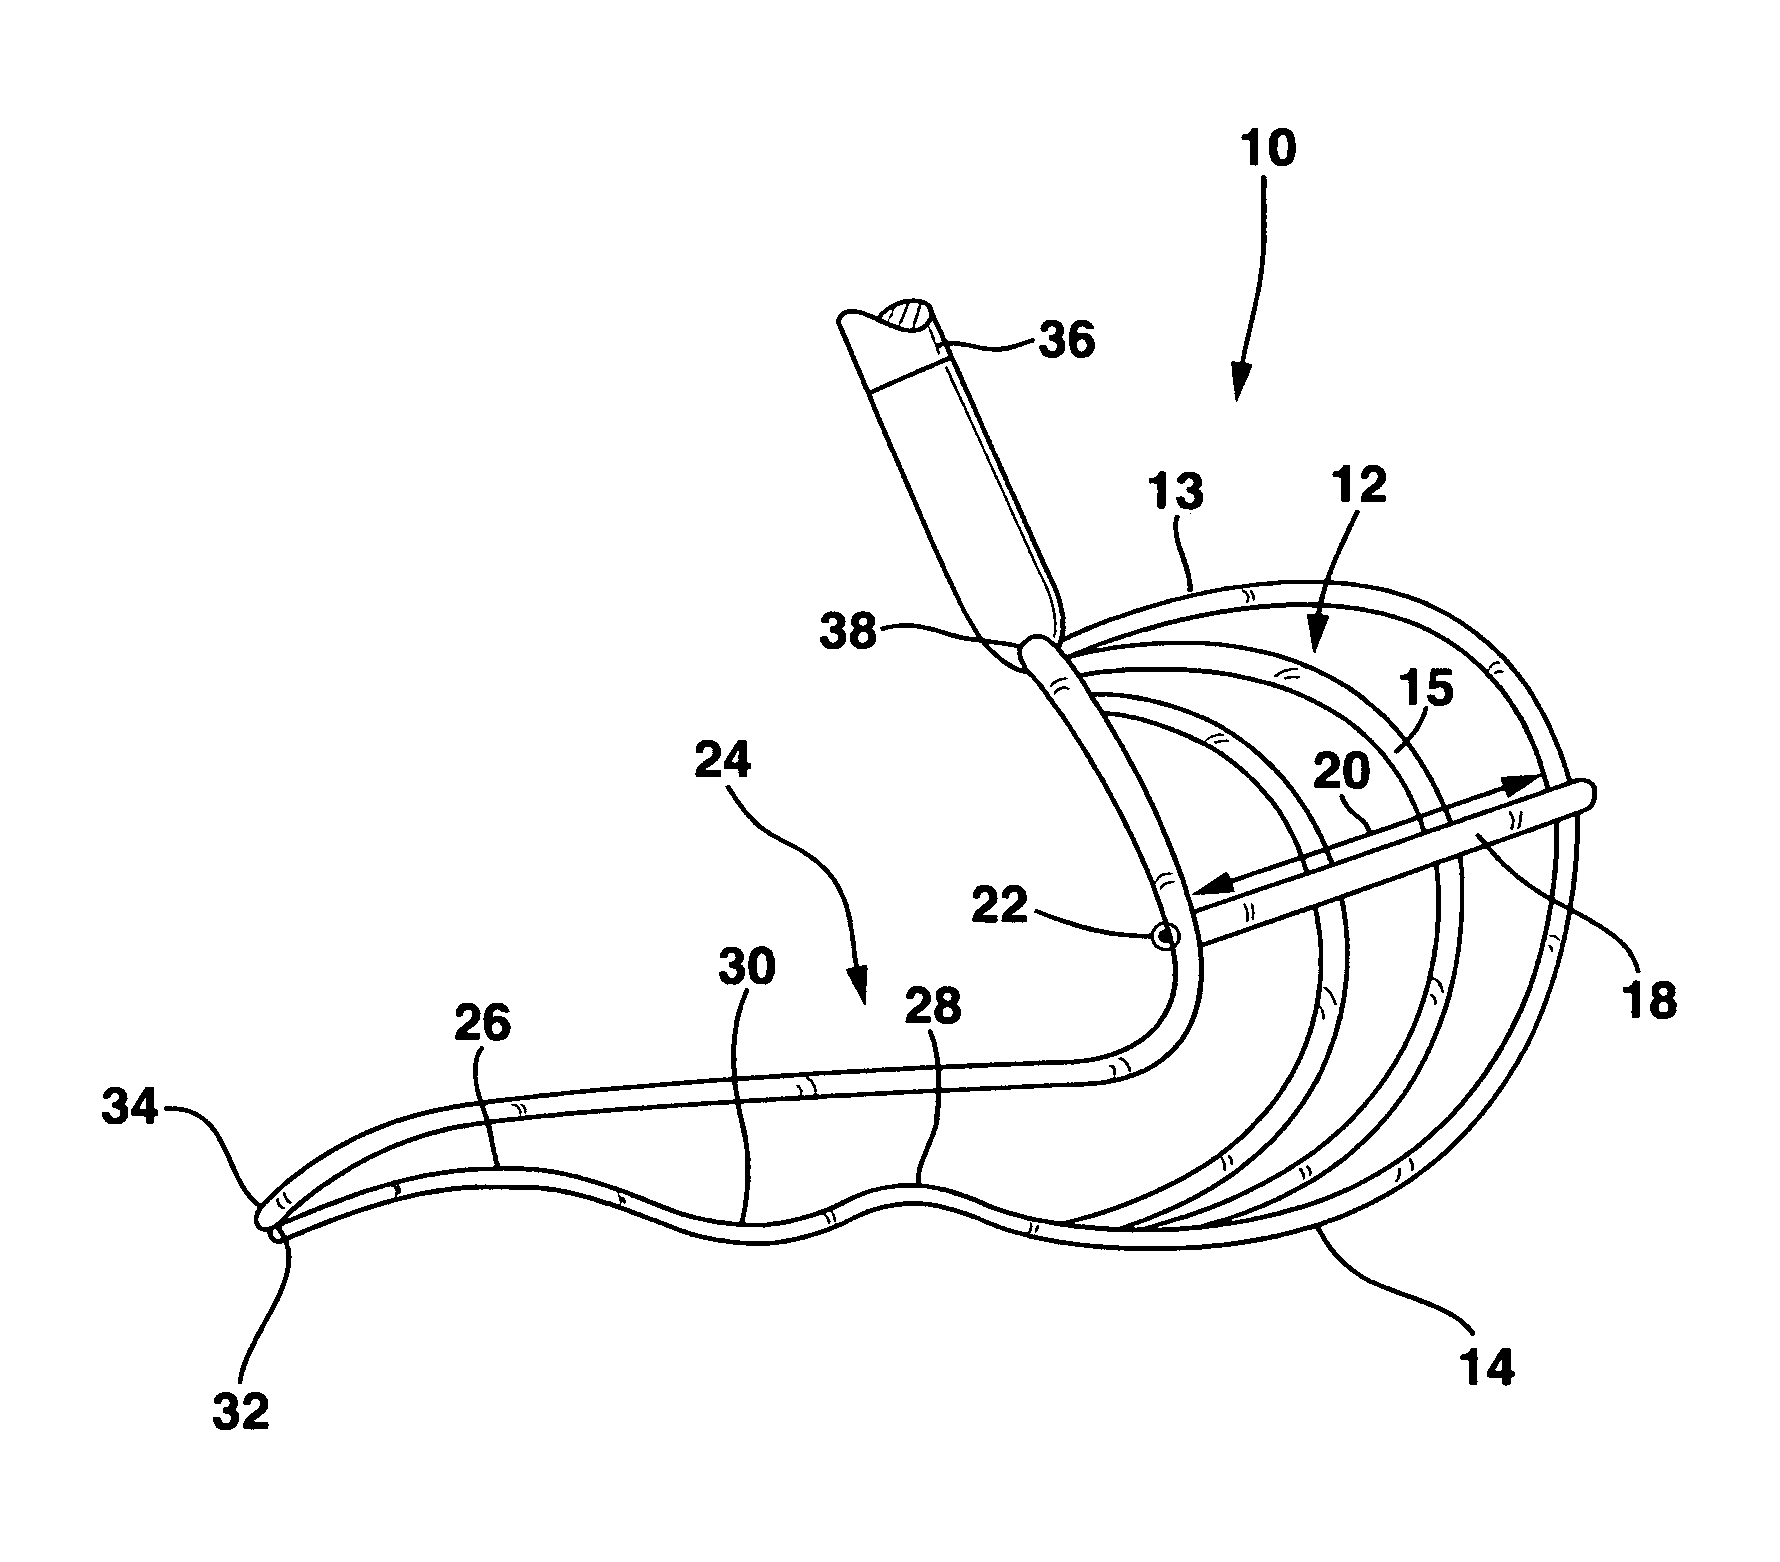 Gathering device for soft objects